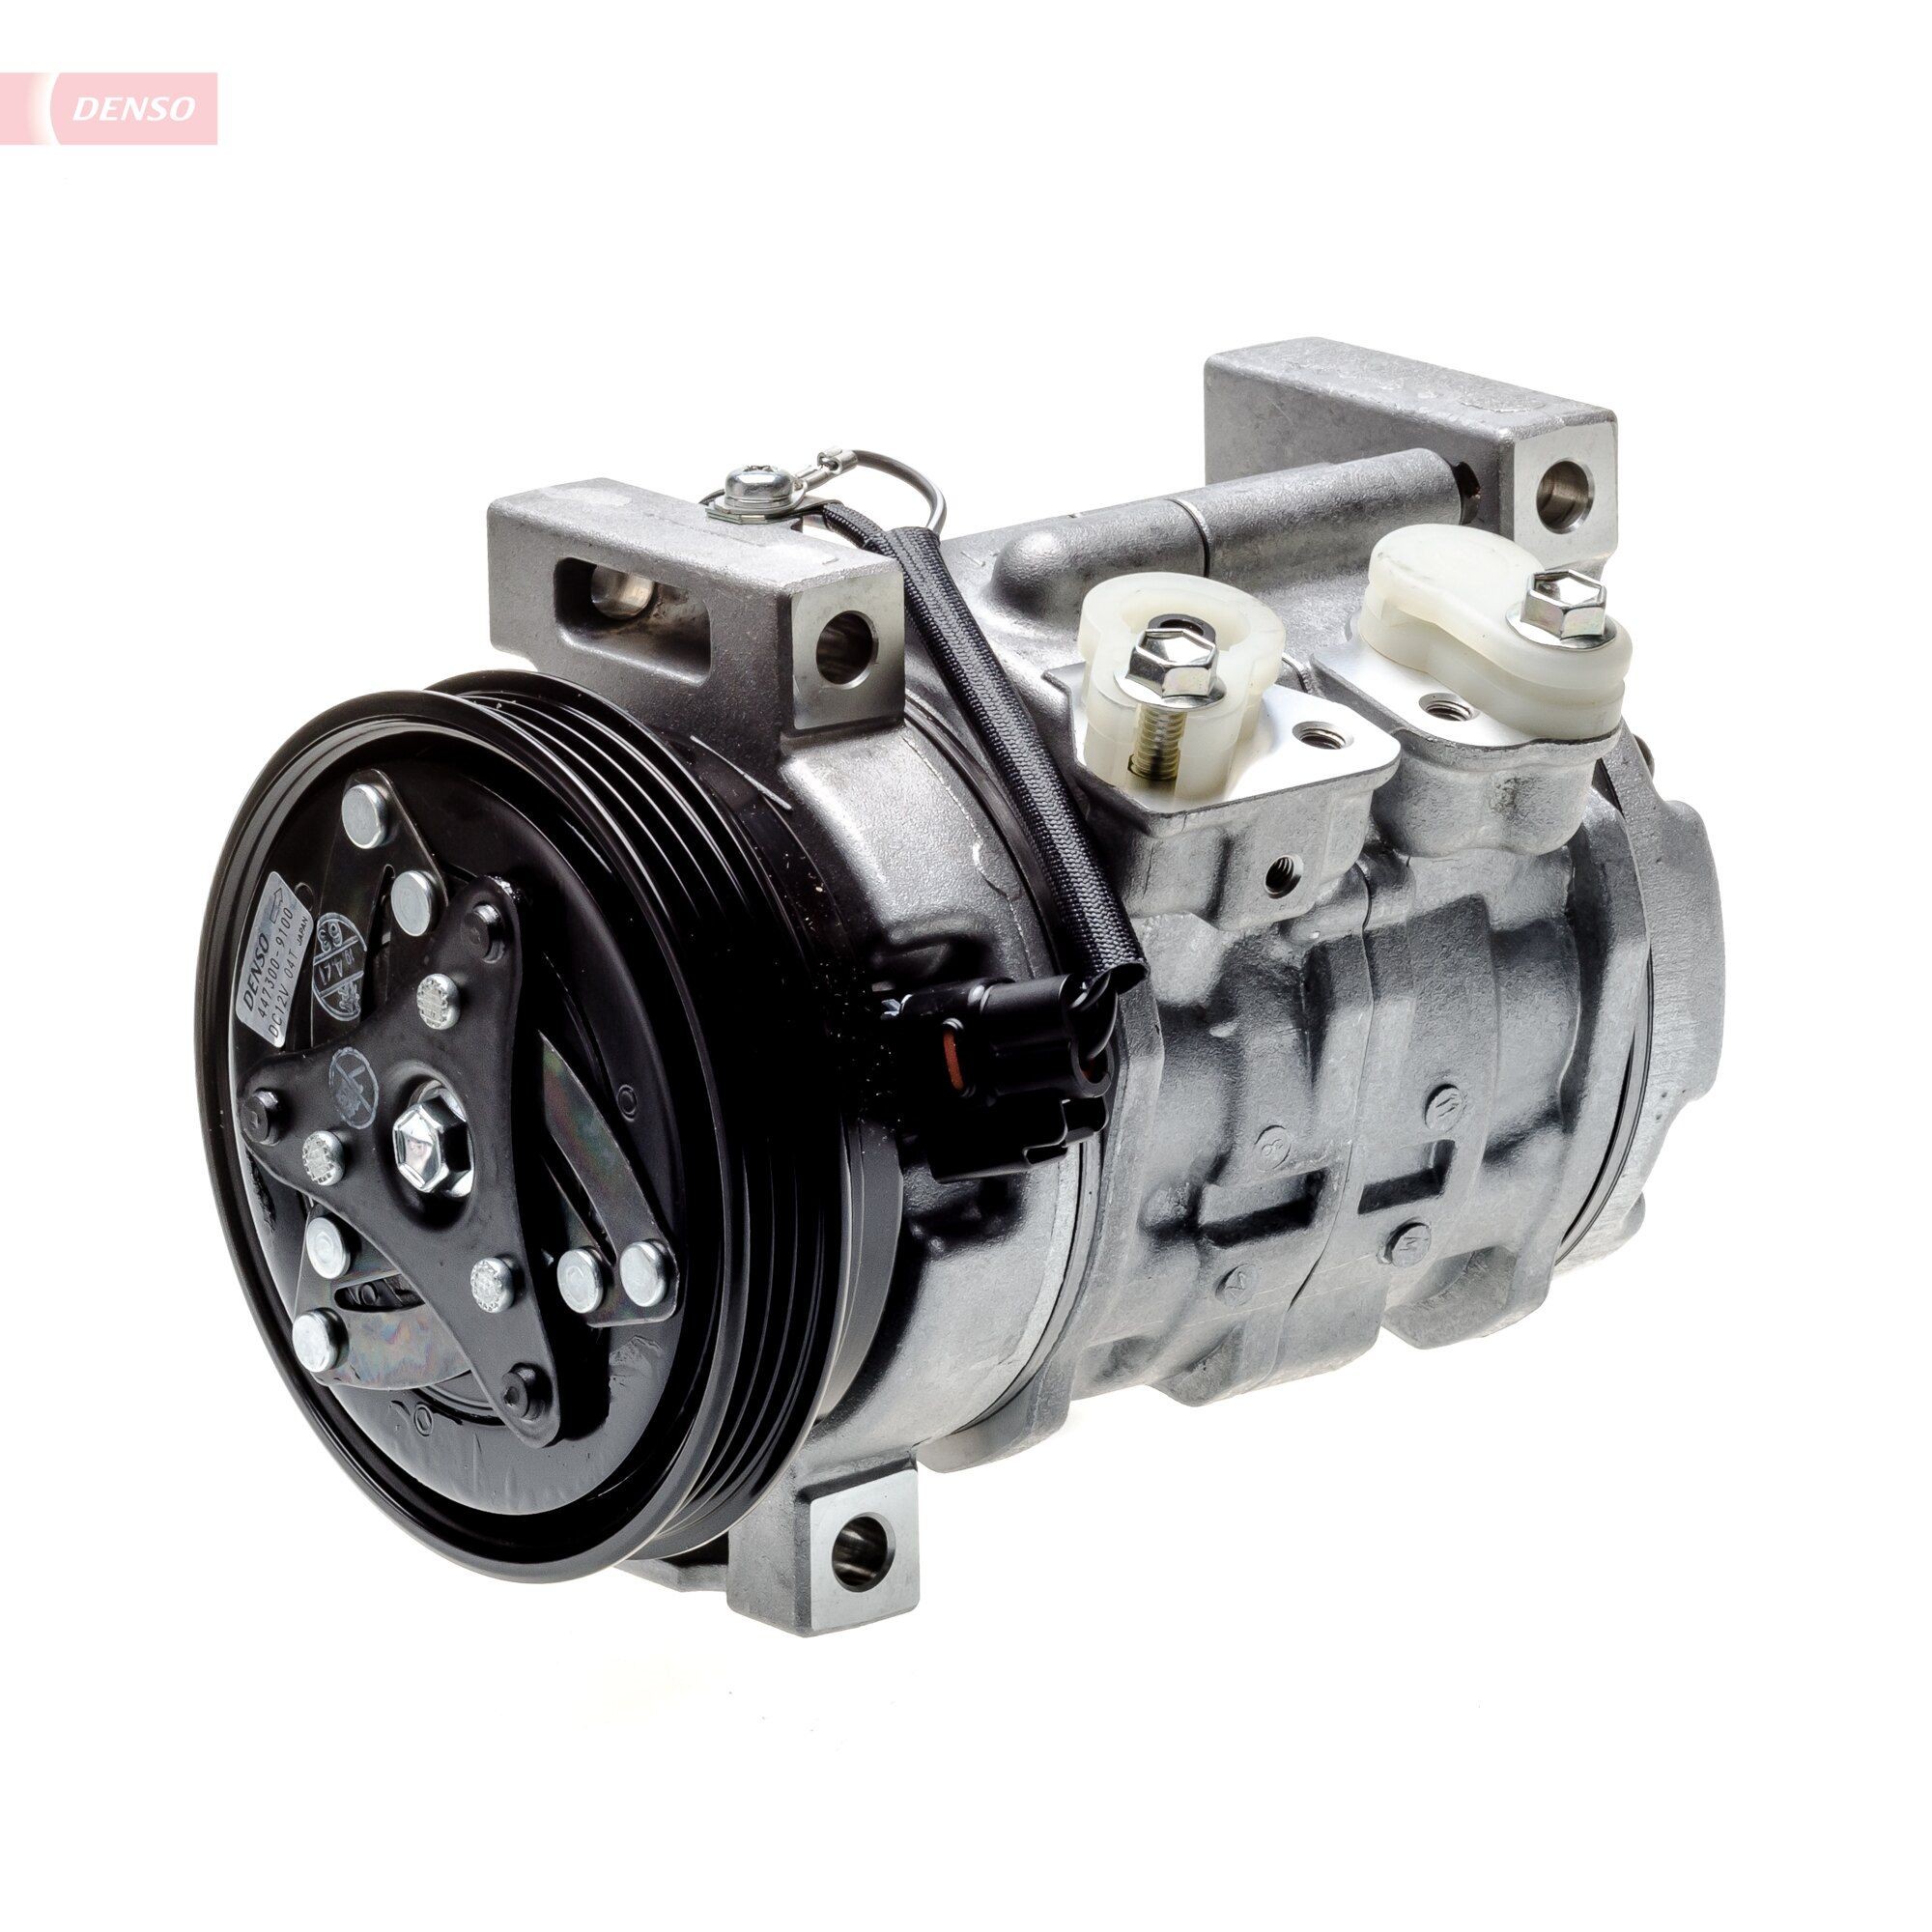 DENSO DCP47006 Air conditioning compressor SUZUKI experience and price